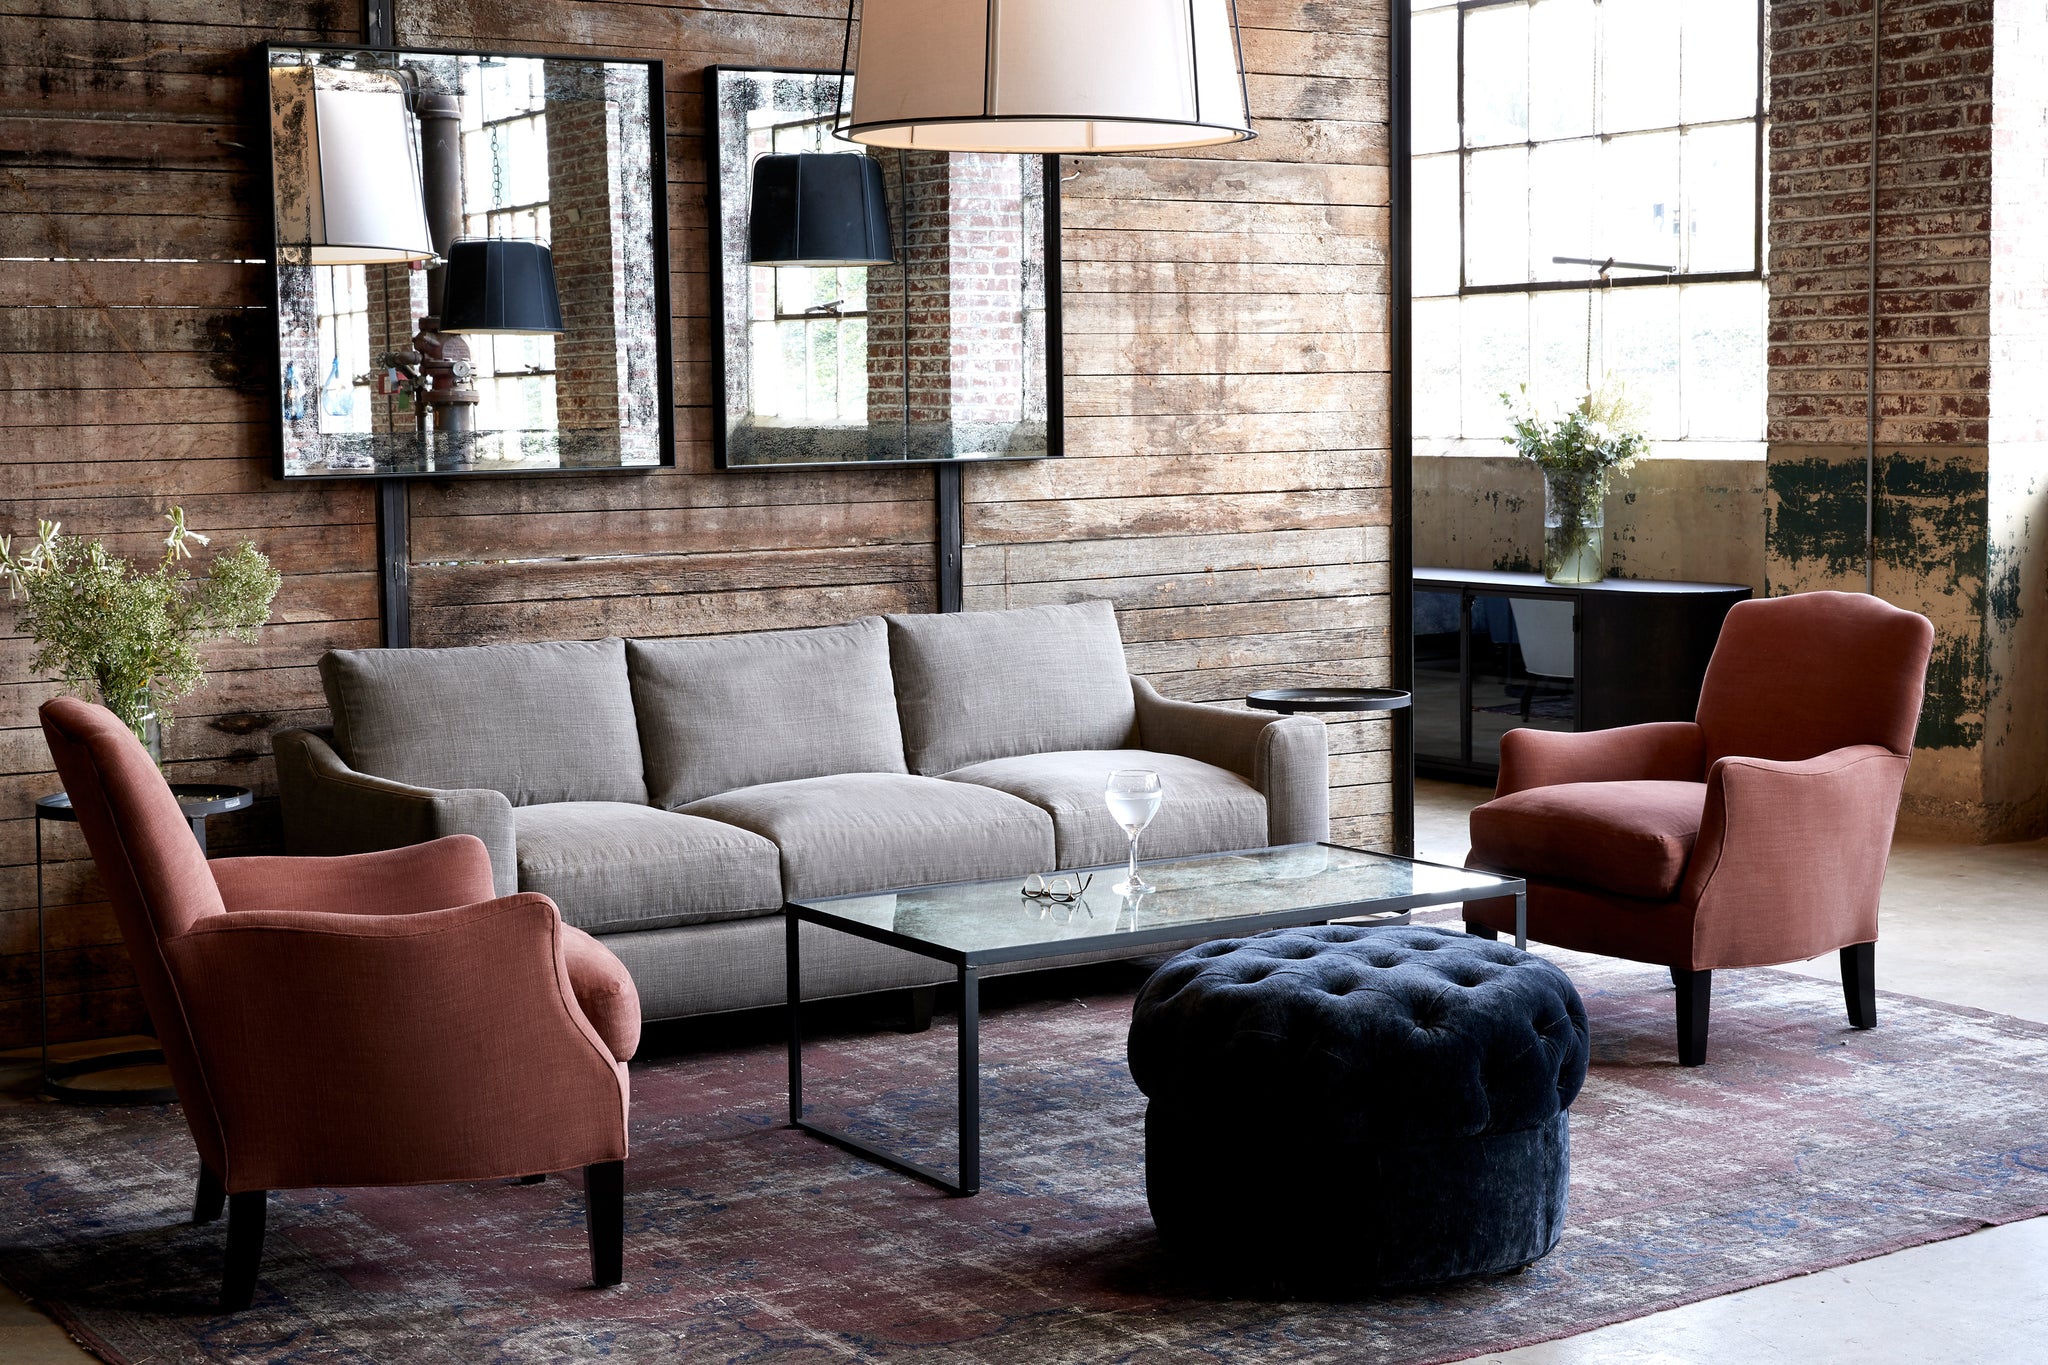  The Gunner sofa is in Rye Warm Grey in a showroom with a wood wall in the back, 2 square mirrors hanging. There are 2 Sebastian chairs in a red linen on the sides, a metal coffee table with a glass top in the middle and a round tufted ottoman in black velvet in front. 